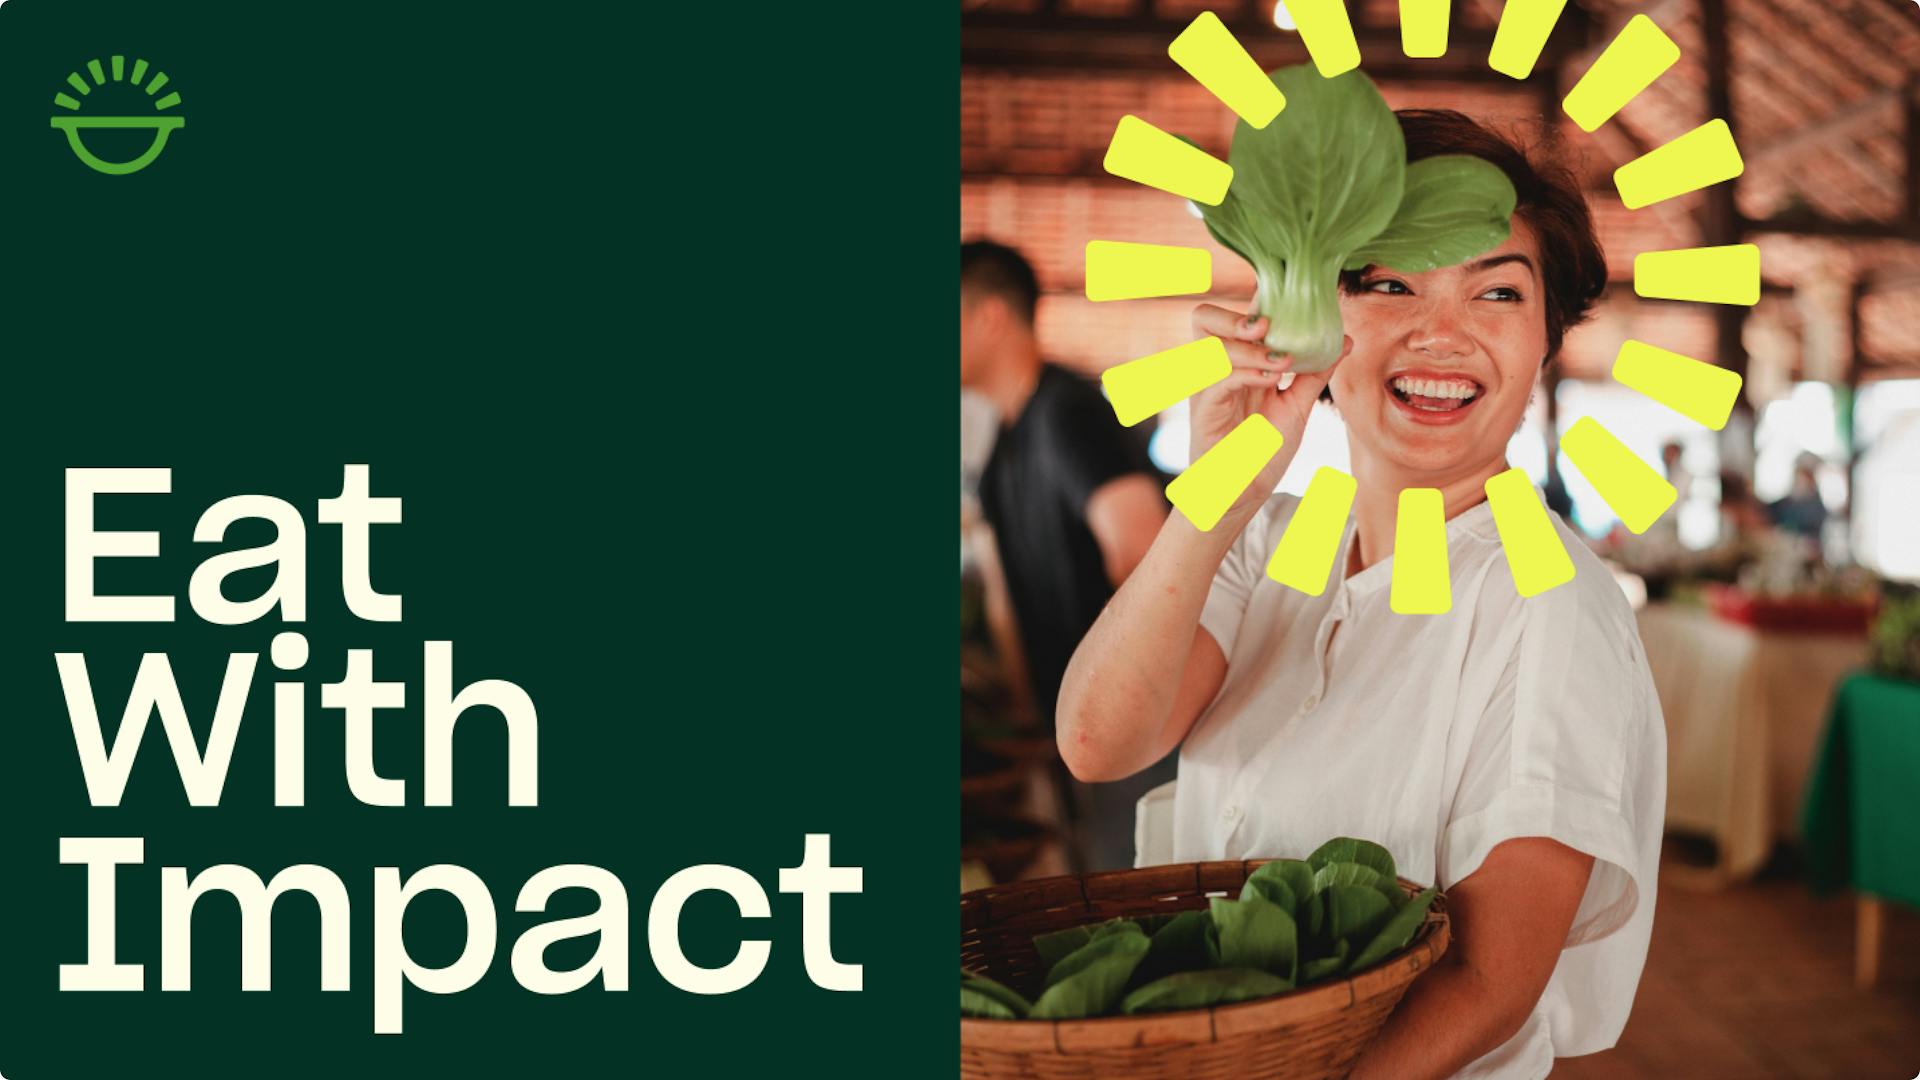 A woman holding up a pak choi vegetable and smiling with text overlay reading "Eat with impact"